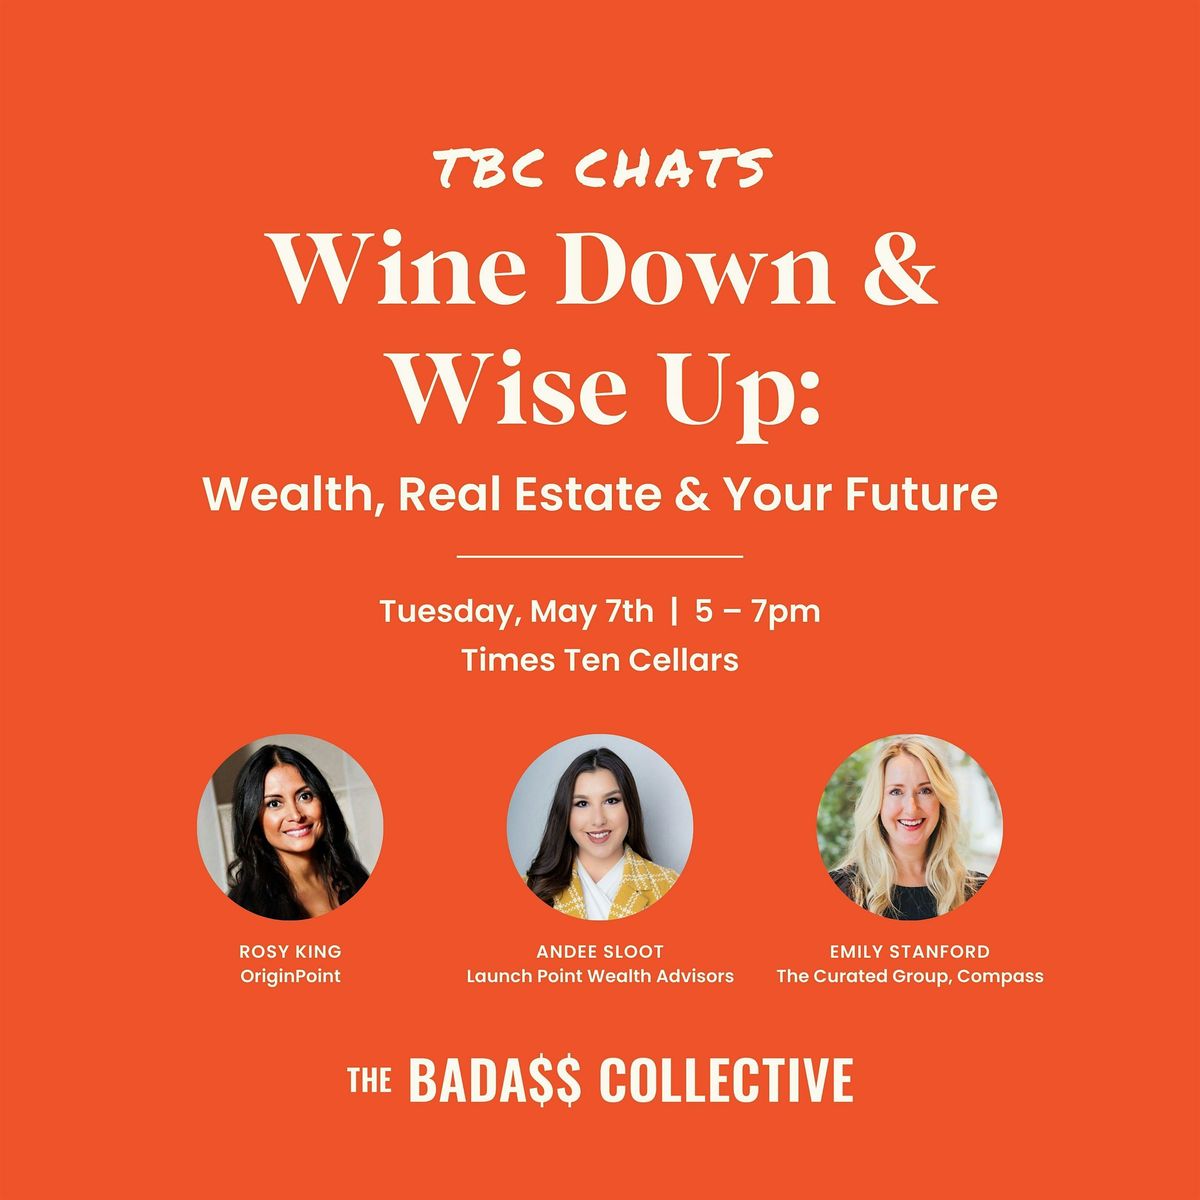 Wine Down & Wise Up: Wealth, Real Estate & Your Future